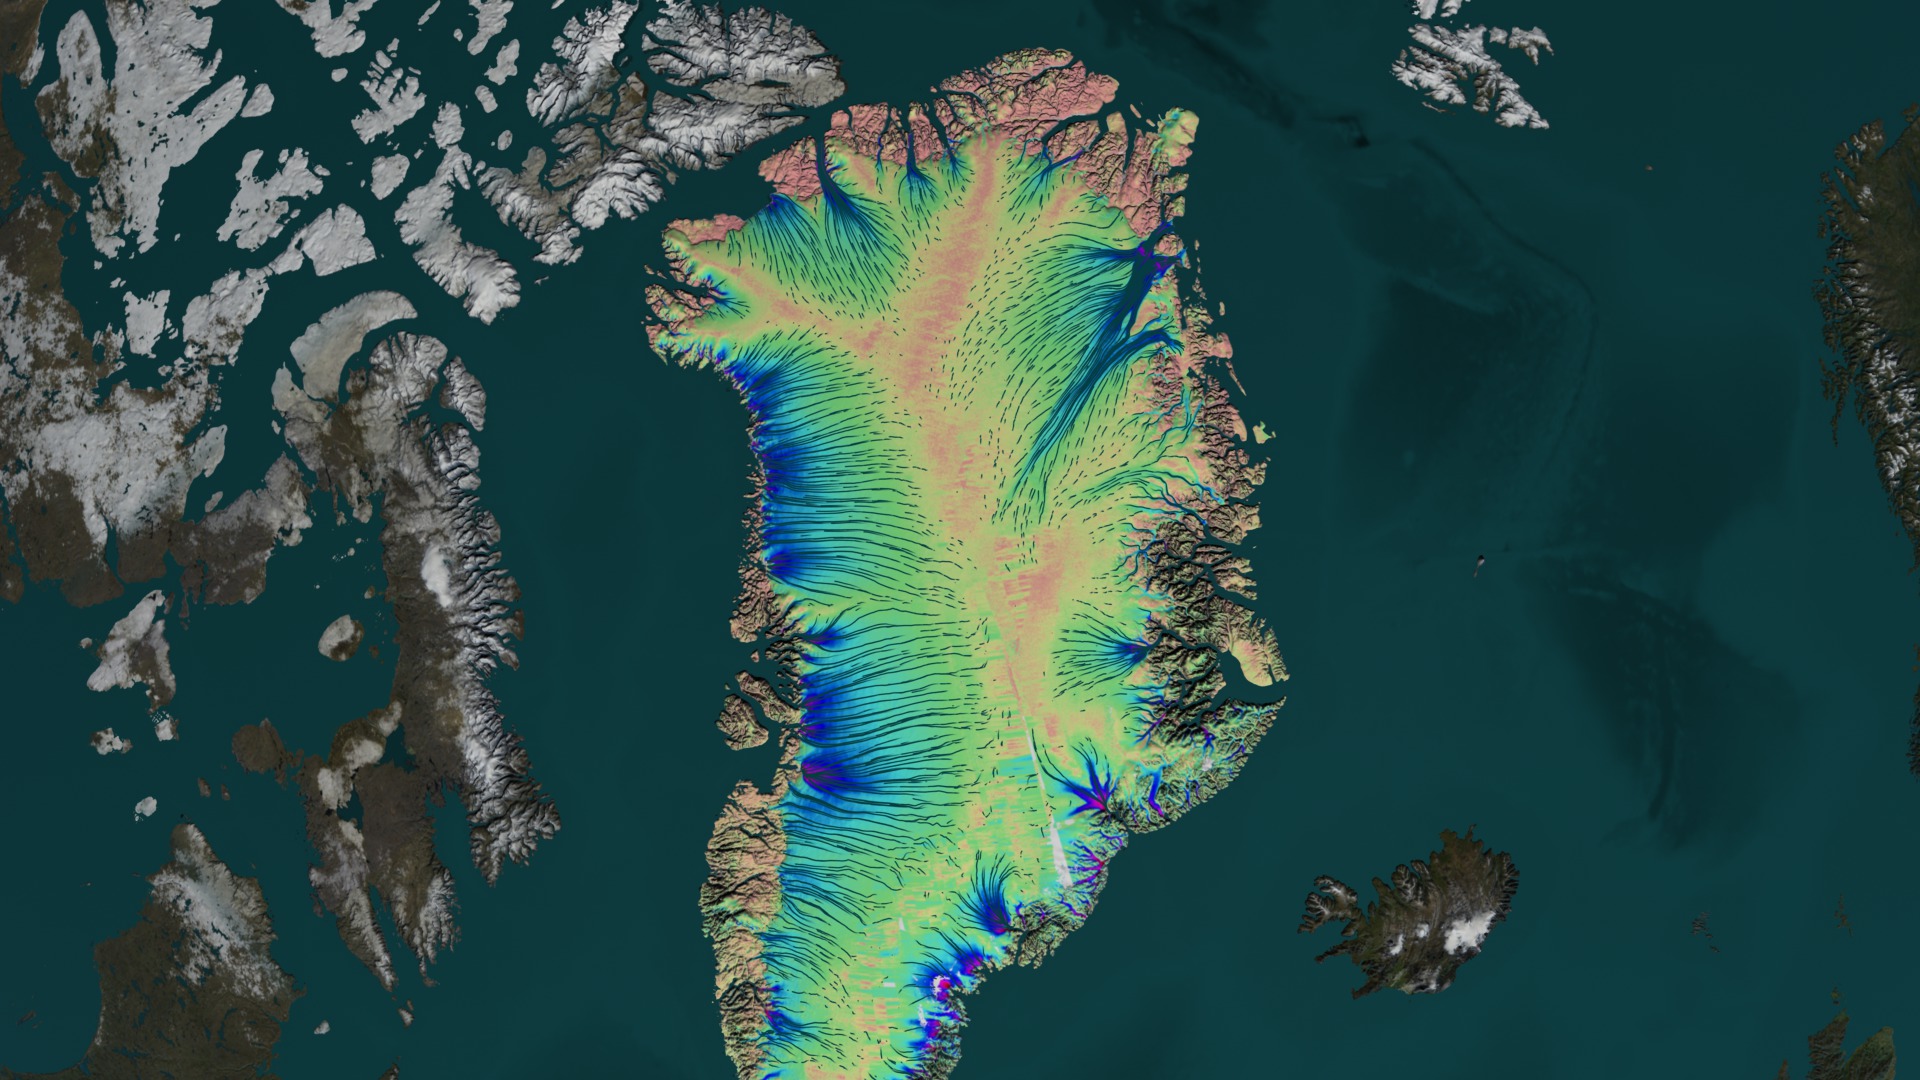 This animation shows how ice is naturally transported from interior topographic divides to the coast via glaciers. The colors represent the speed of ice flow, with areas in red and purple flowing the fastest at rates of kilometers per year. The vectors indicate the direction of flow.